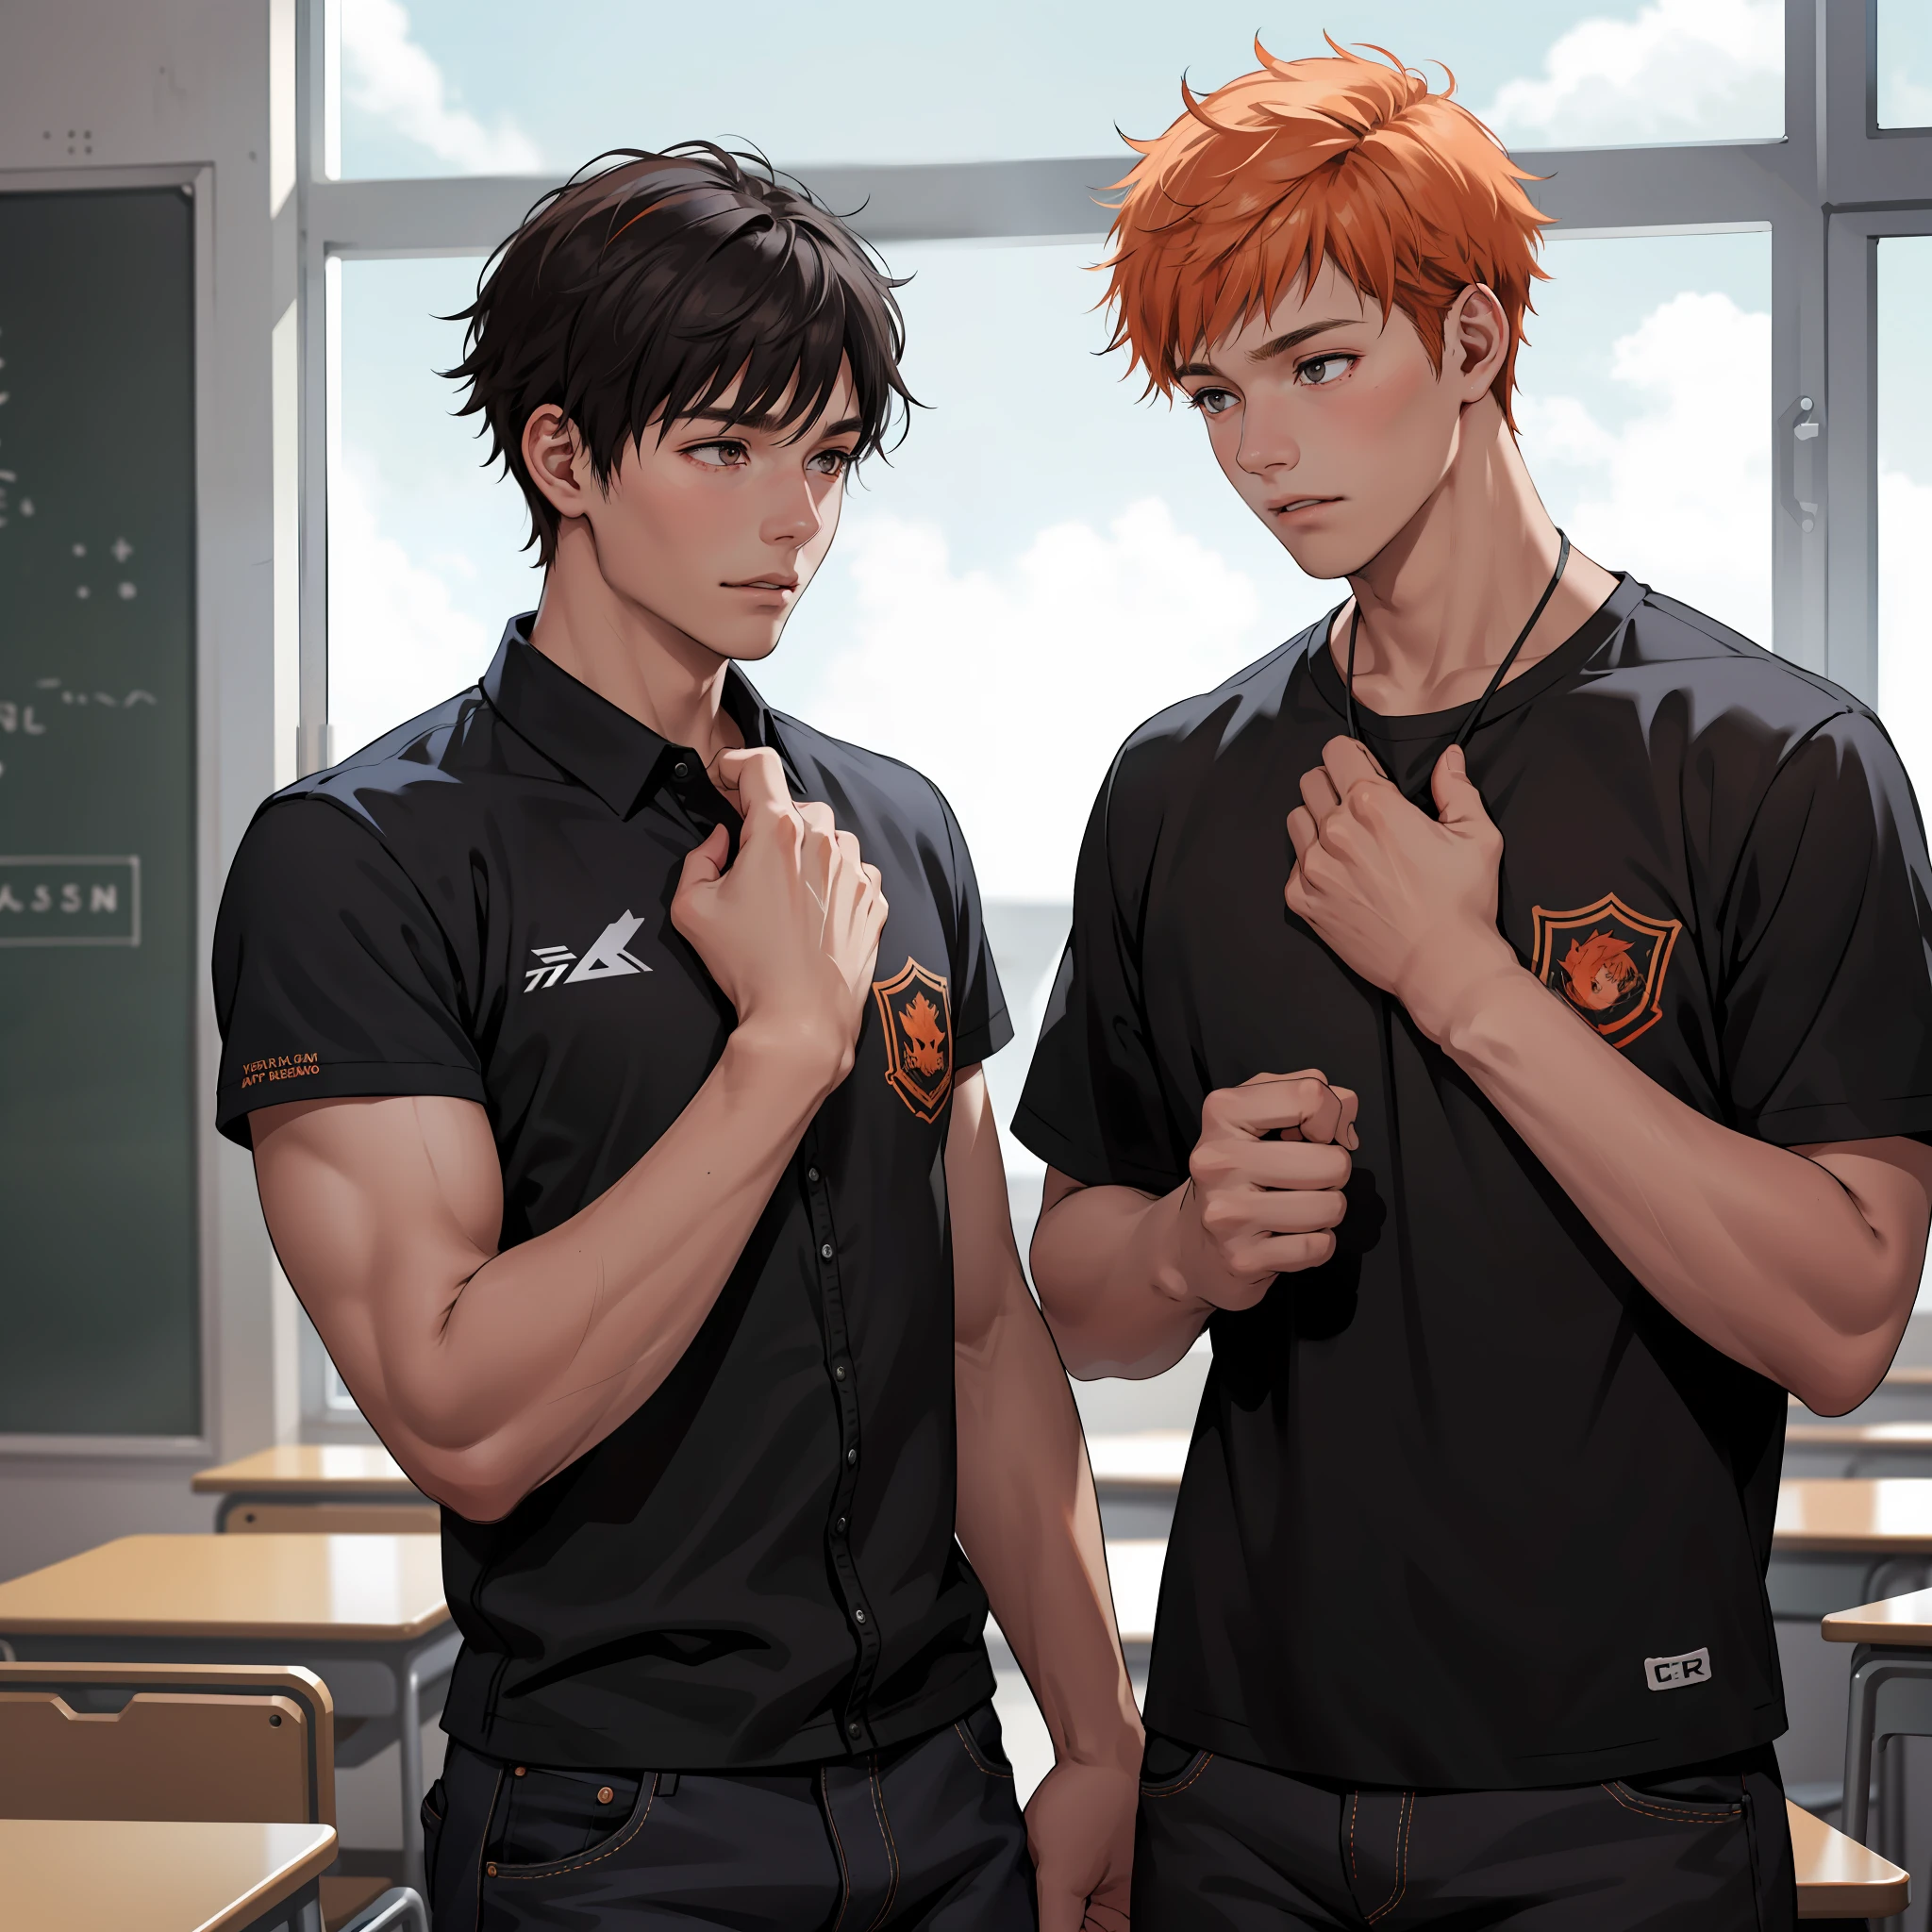 Two 15-year-old orange-haired teenage friends chatting at school share a secret that they're almost friends with siblings... (usar los mismo personajes)